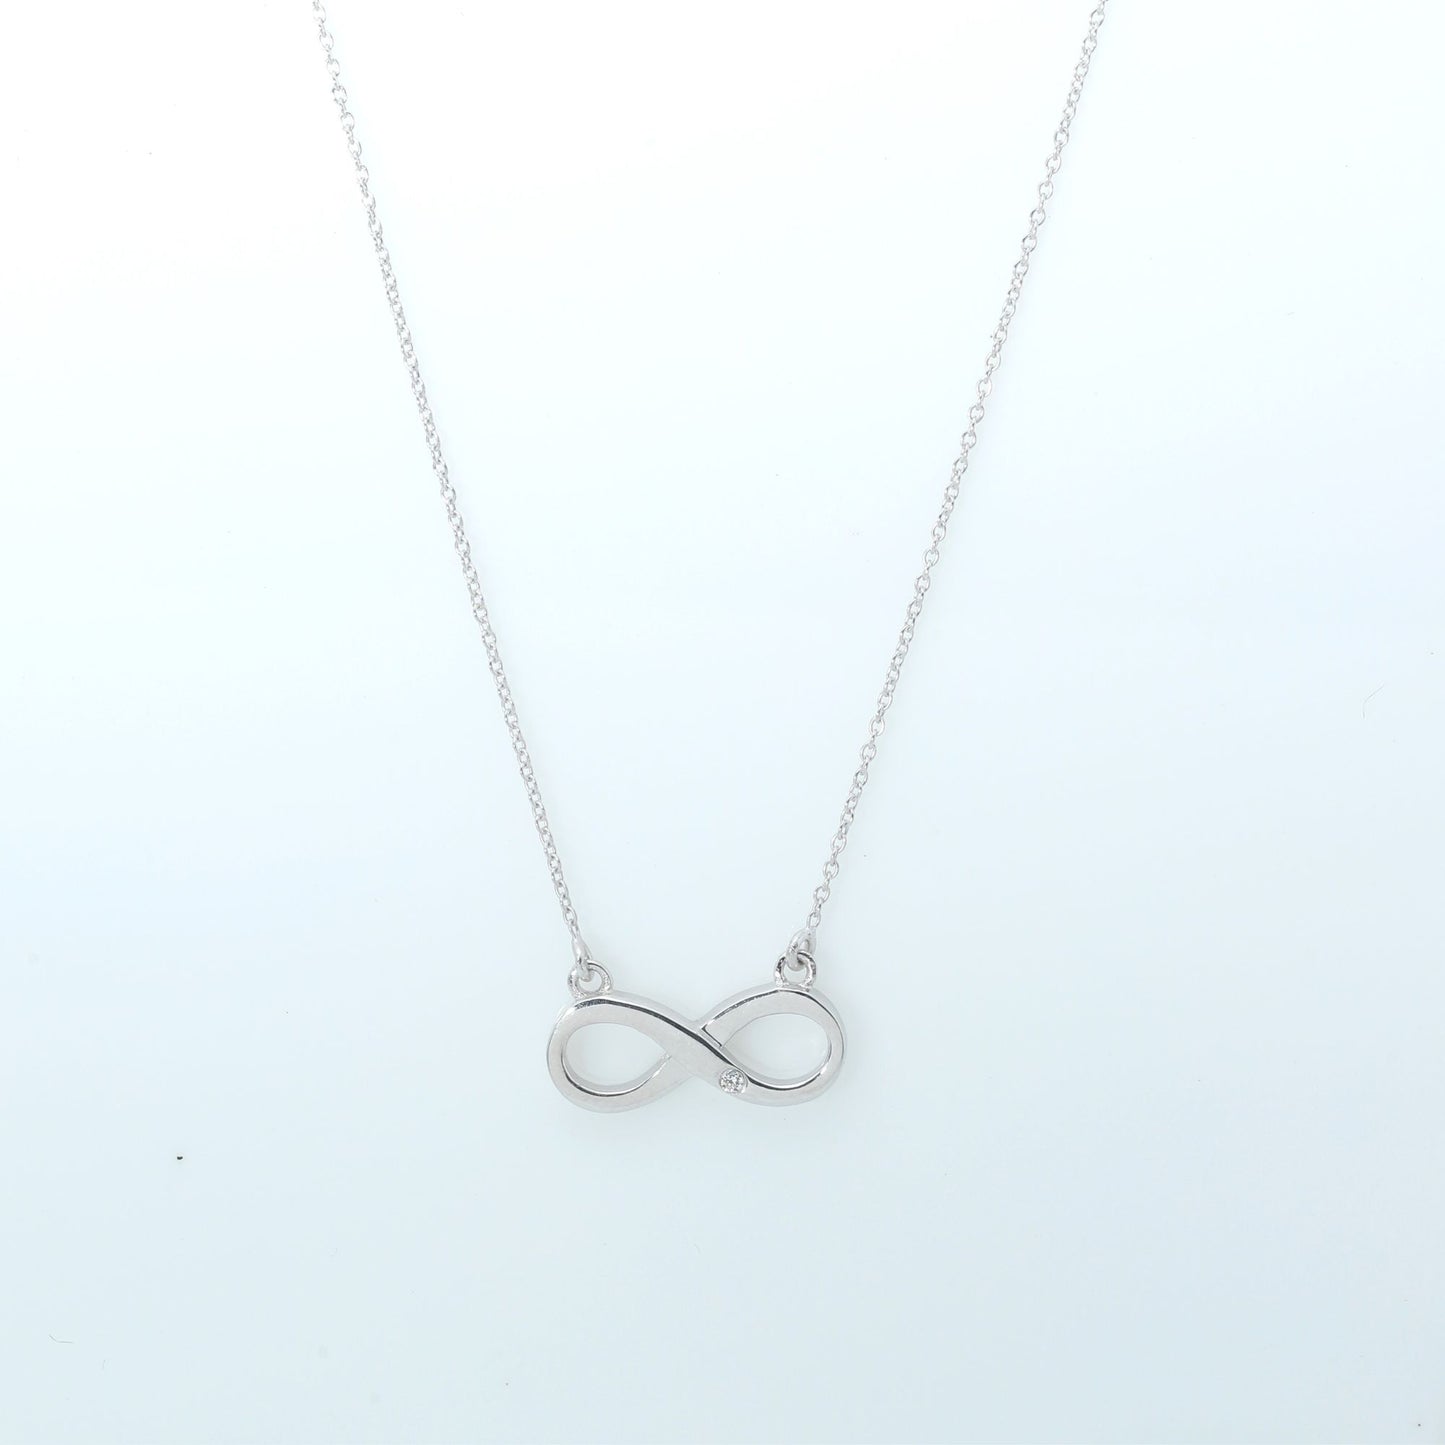 SPARKLING INFINITY NECKLACE - STERLING SILVER